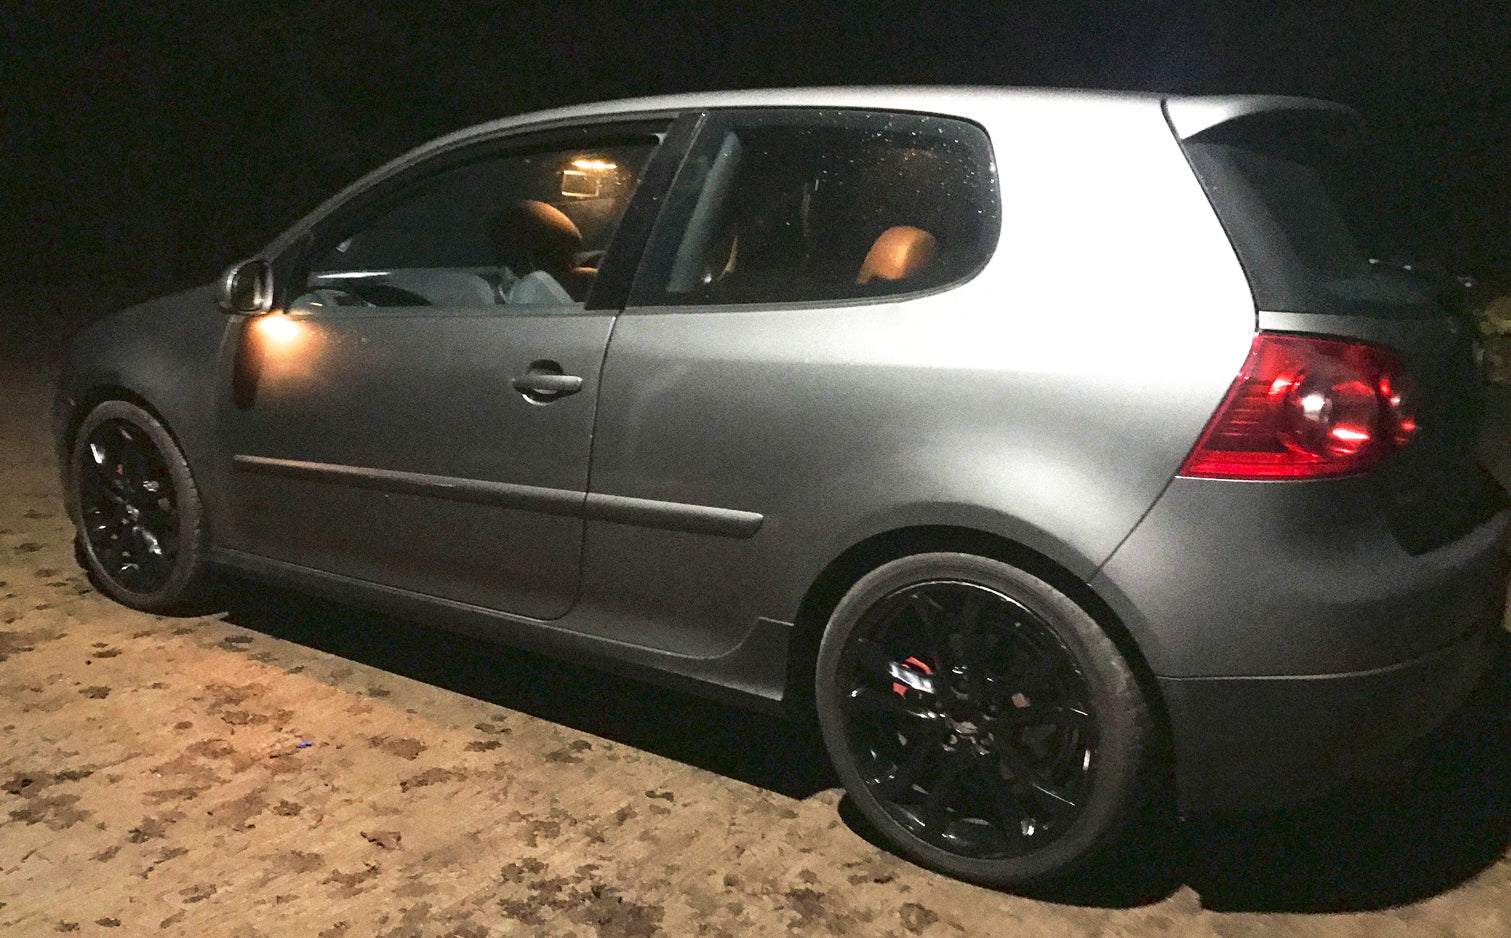 VW GOLF GTI MK5 MANUAL - FULL CAR IN PARTS (ALL PARTS FROM GTI MINUS SHELL)